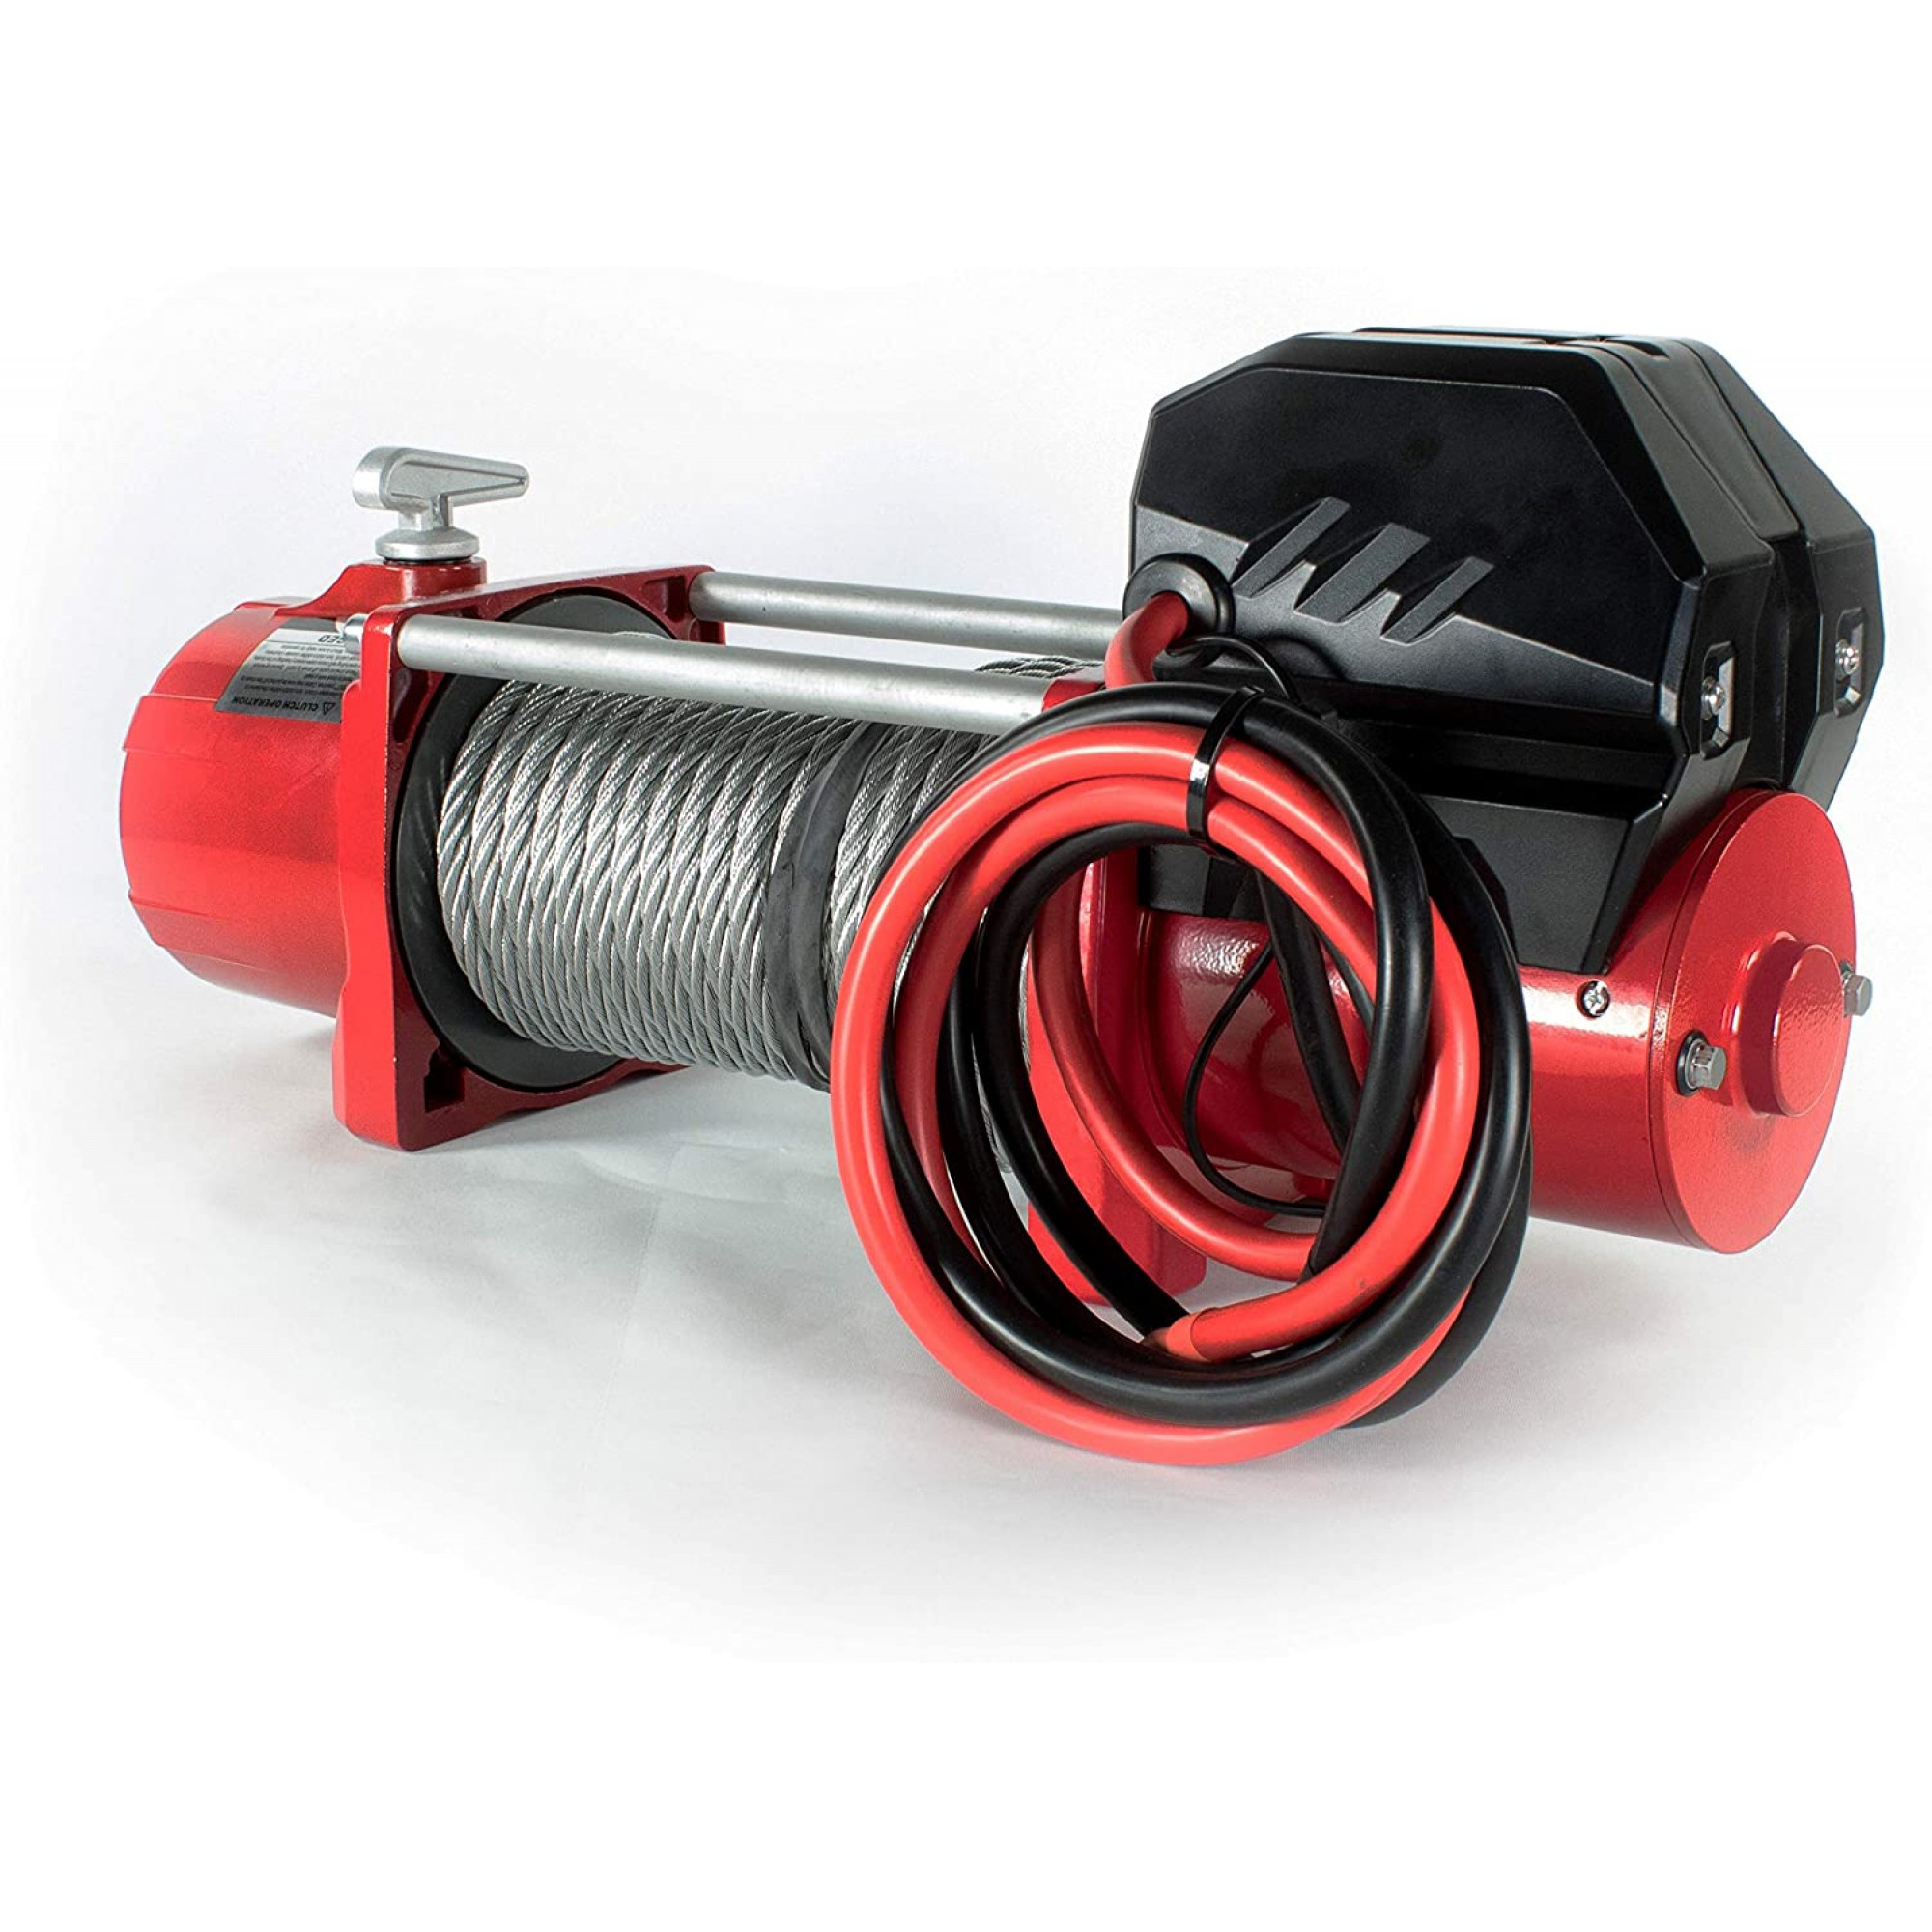 Stealth V2 13500LB 12V Winch - Steel Rope Complete with Wired and Wireless Remote